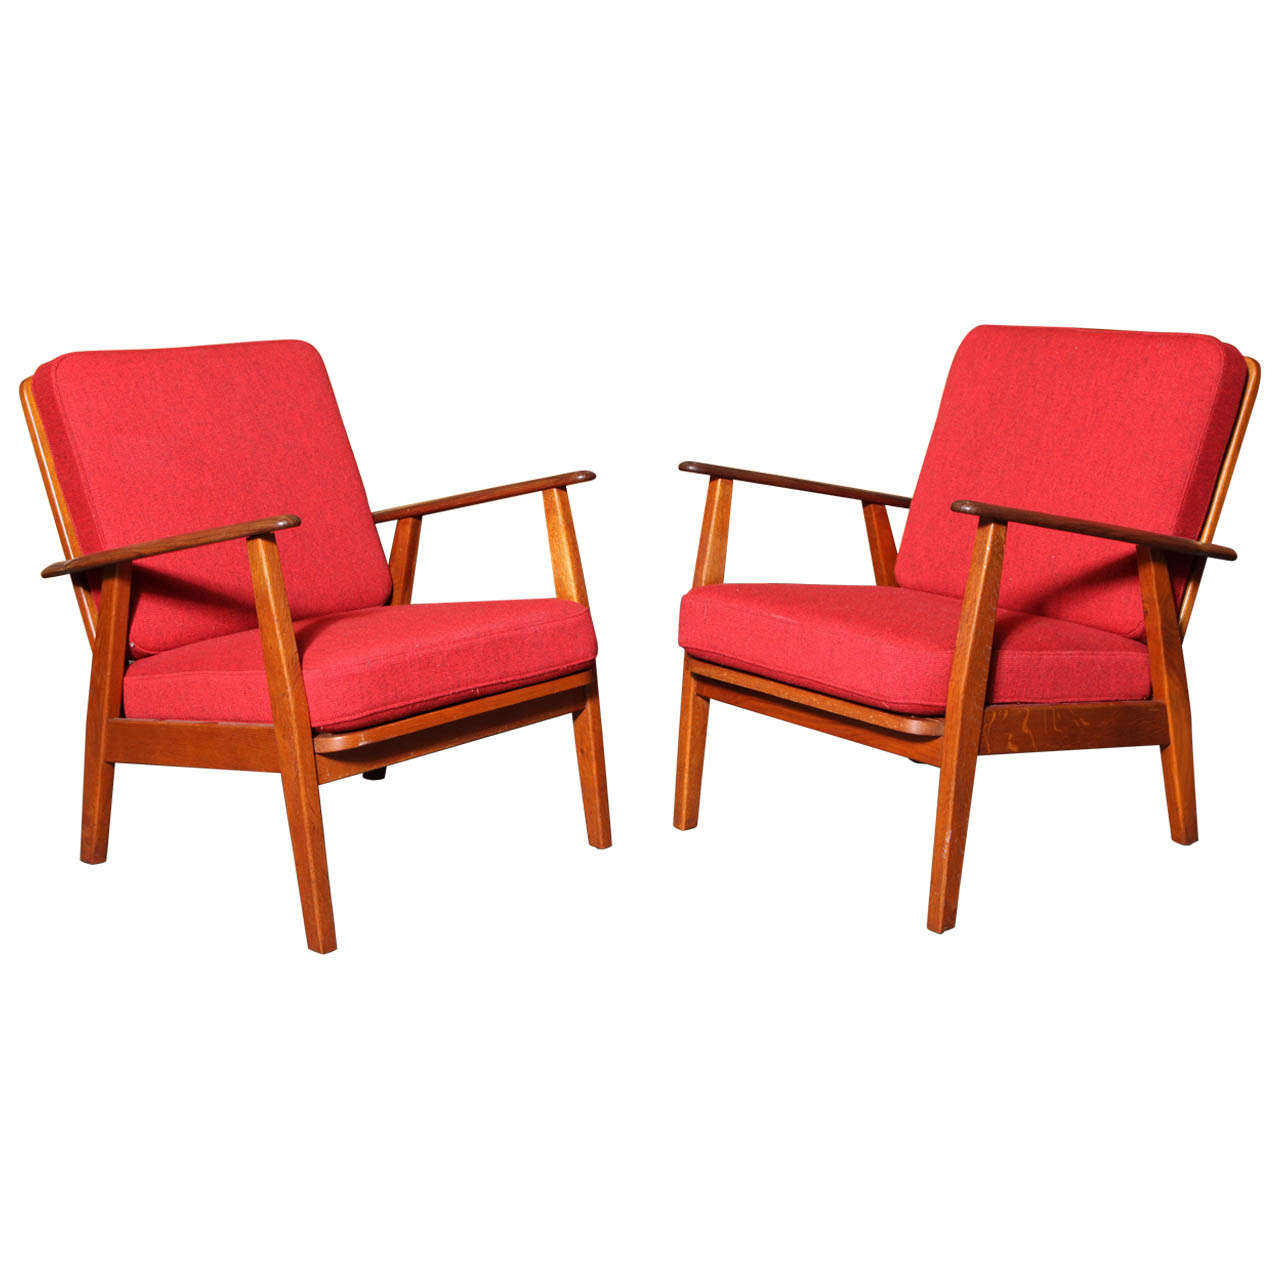 Pair of Teak and Red Danish Modern Lounge Chairs